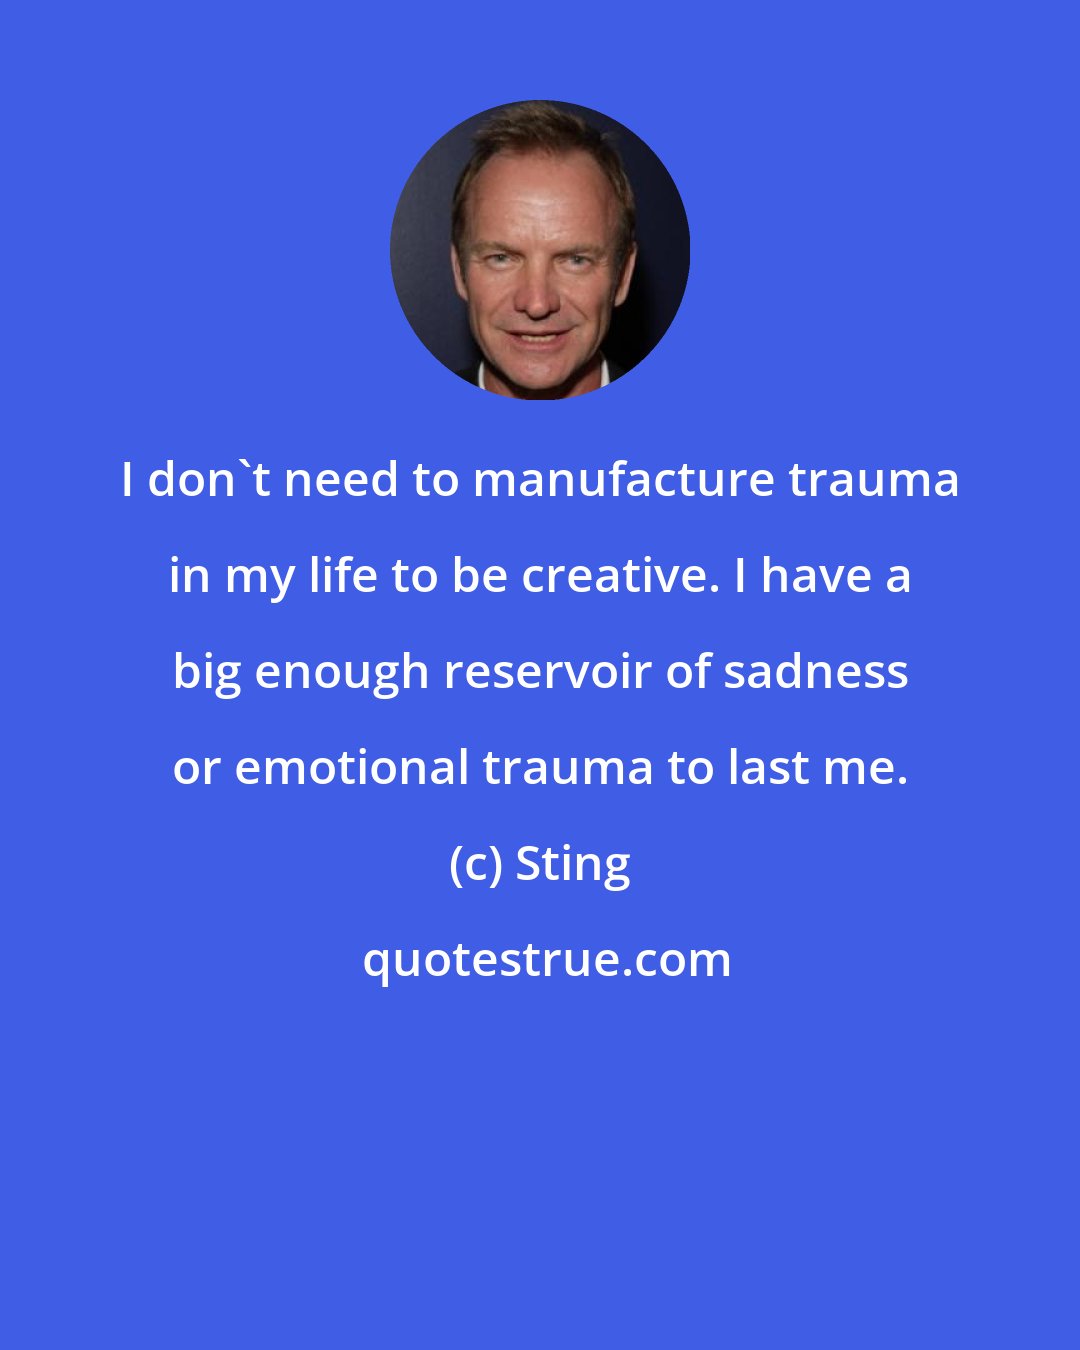 Sting: I don't need to manufacture trauma in my life to be creative. I have a big enough reservoir of sadness or emotional trauma to last me.